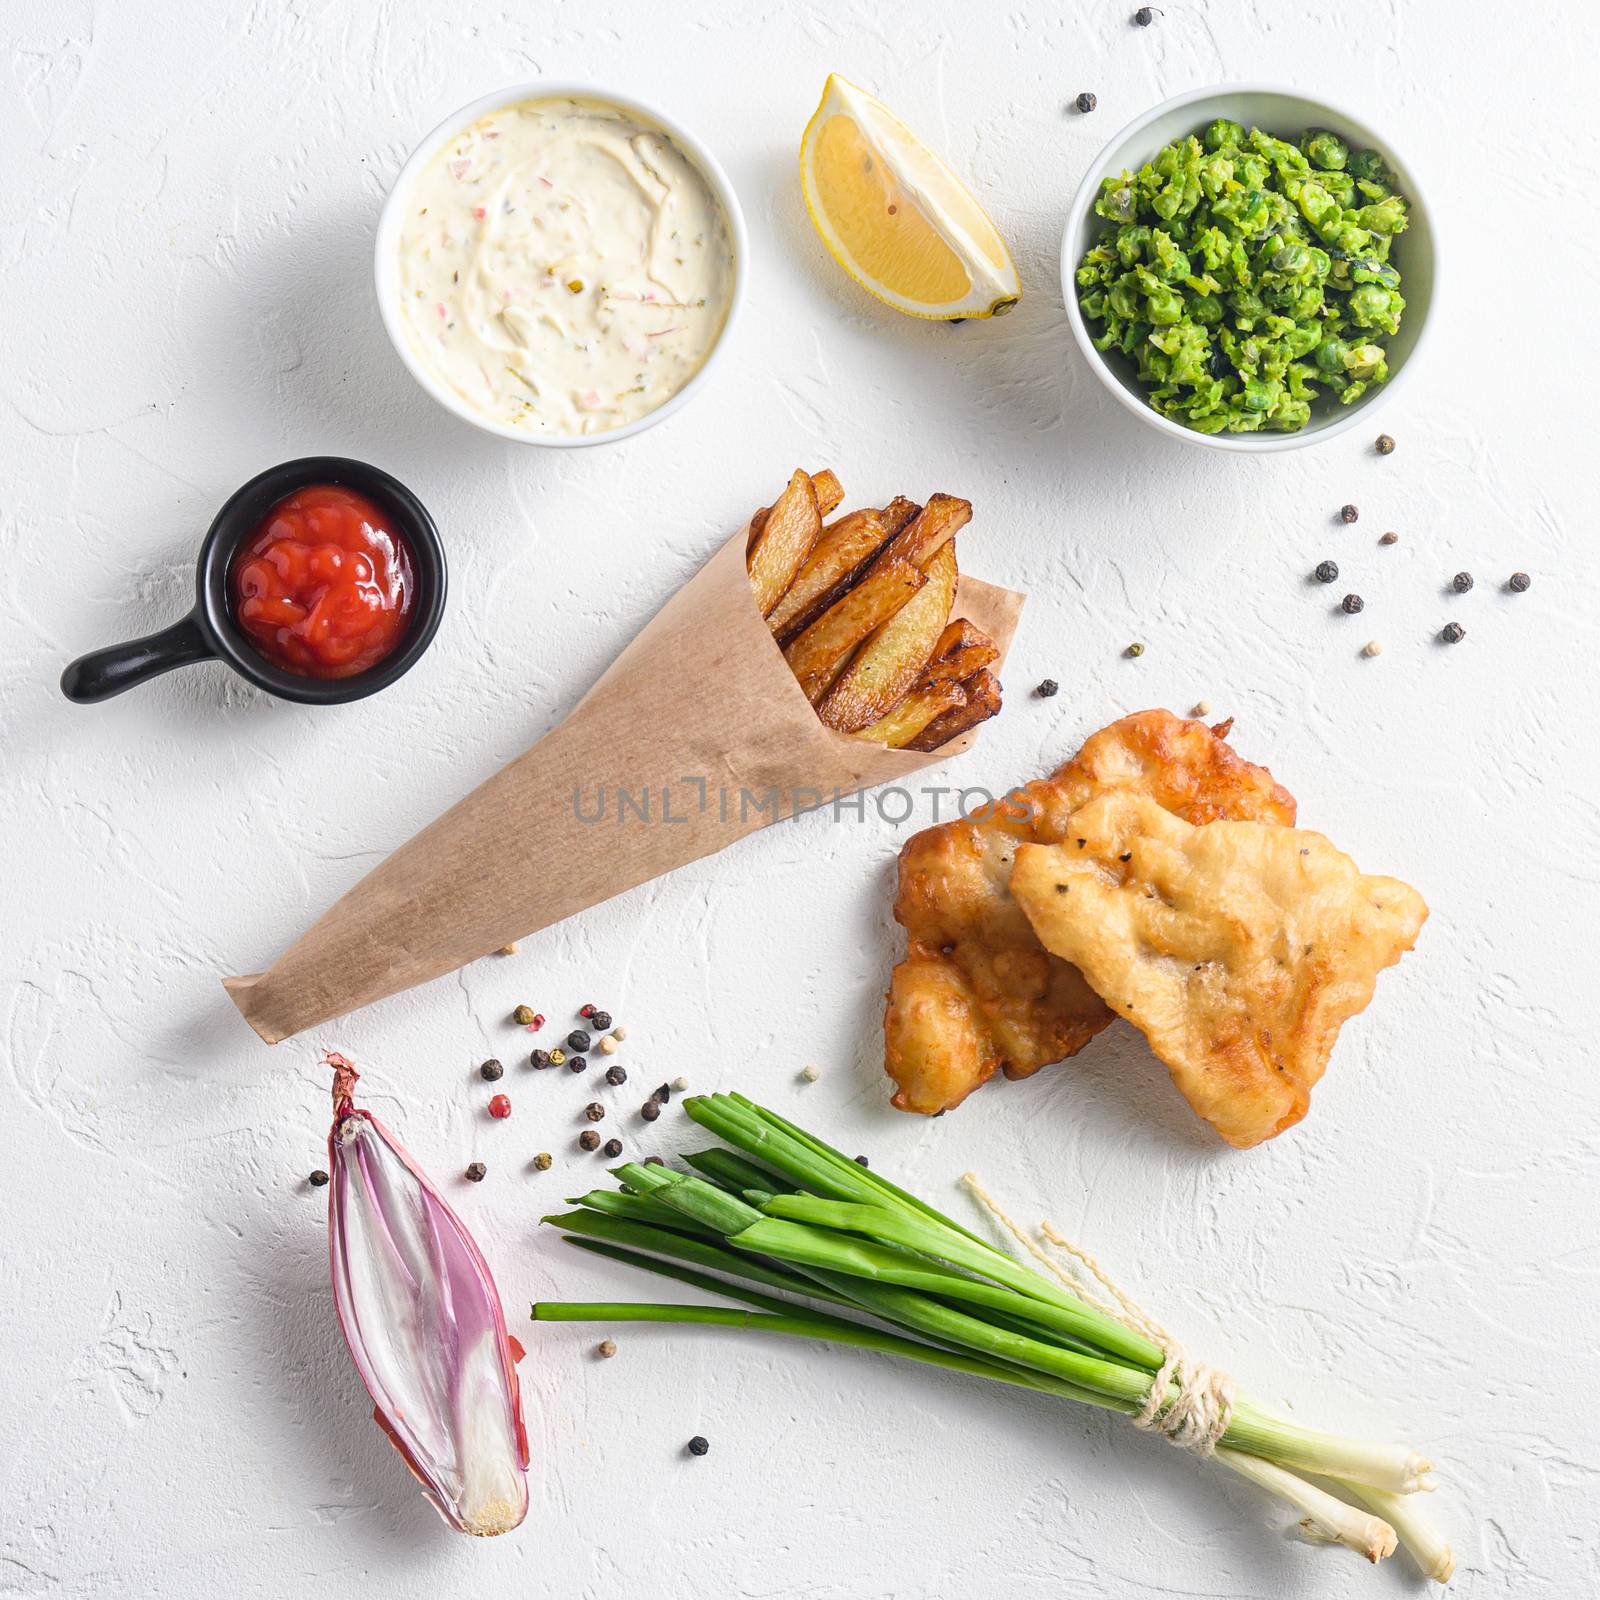 Fried fish and chips in a paper cone on white background with all components classic recipe takeaway food top view white stone textured background square crop by Ilianesolenyi